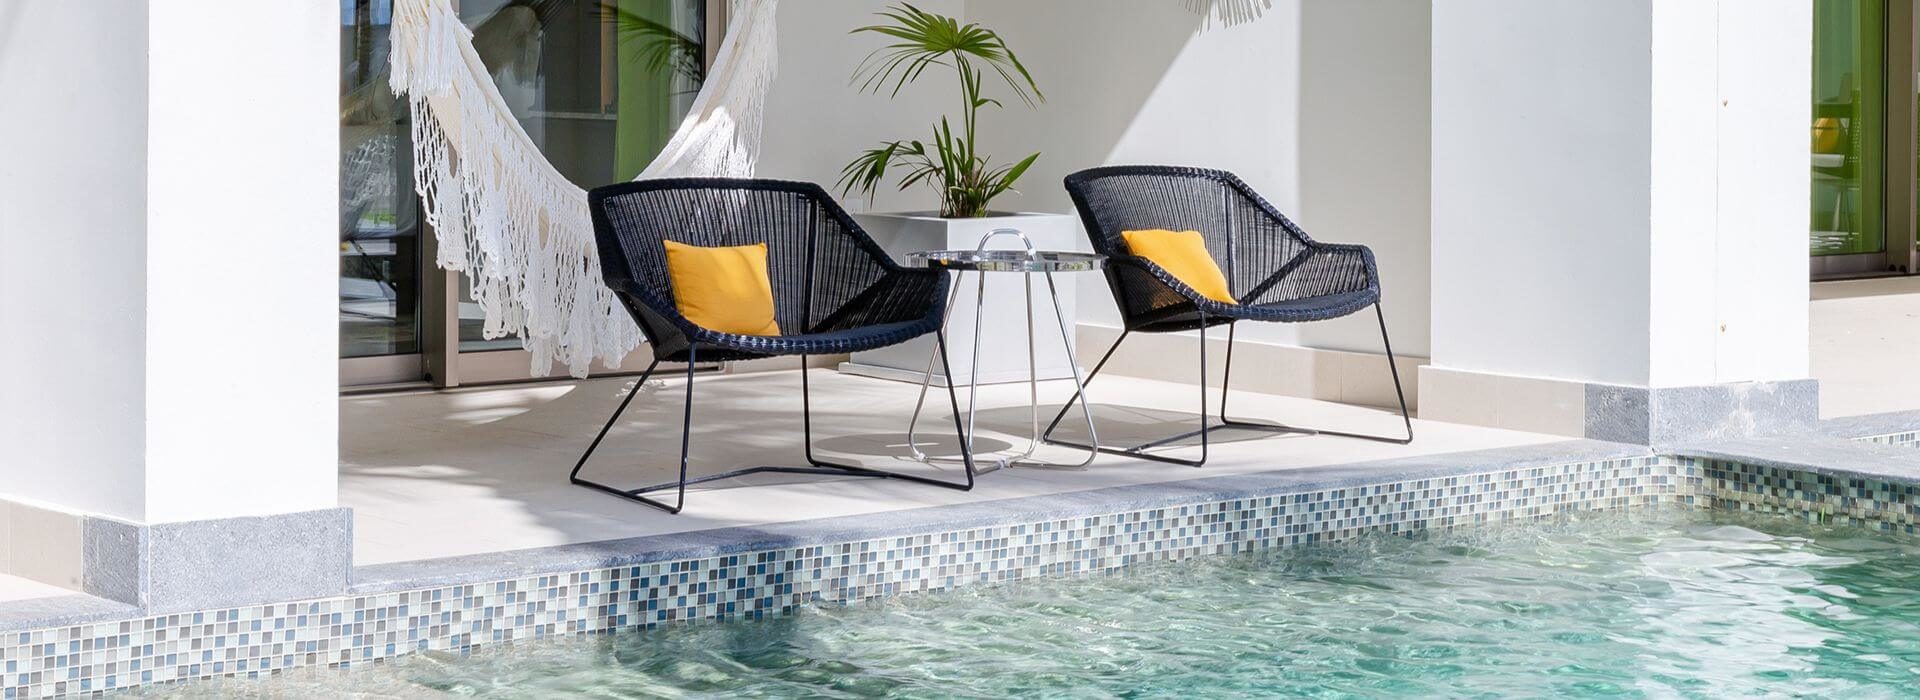 A patio with 2 wicker chairs with decorative pillows, a hammock, and a private swim up pool.